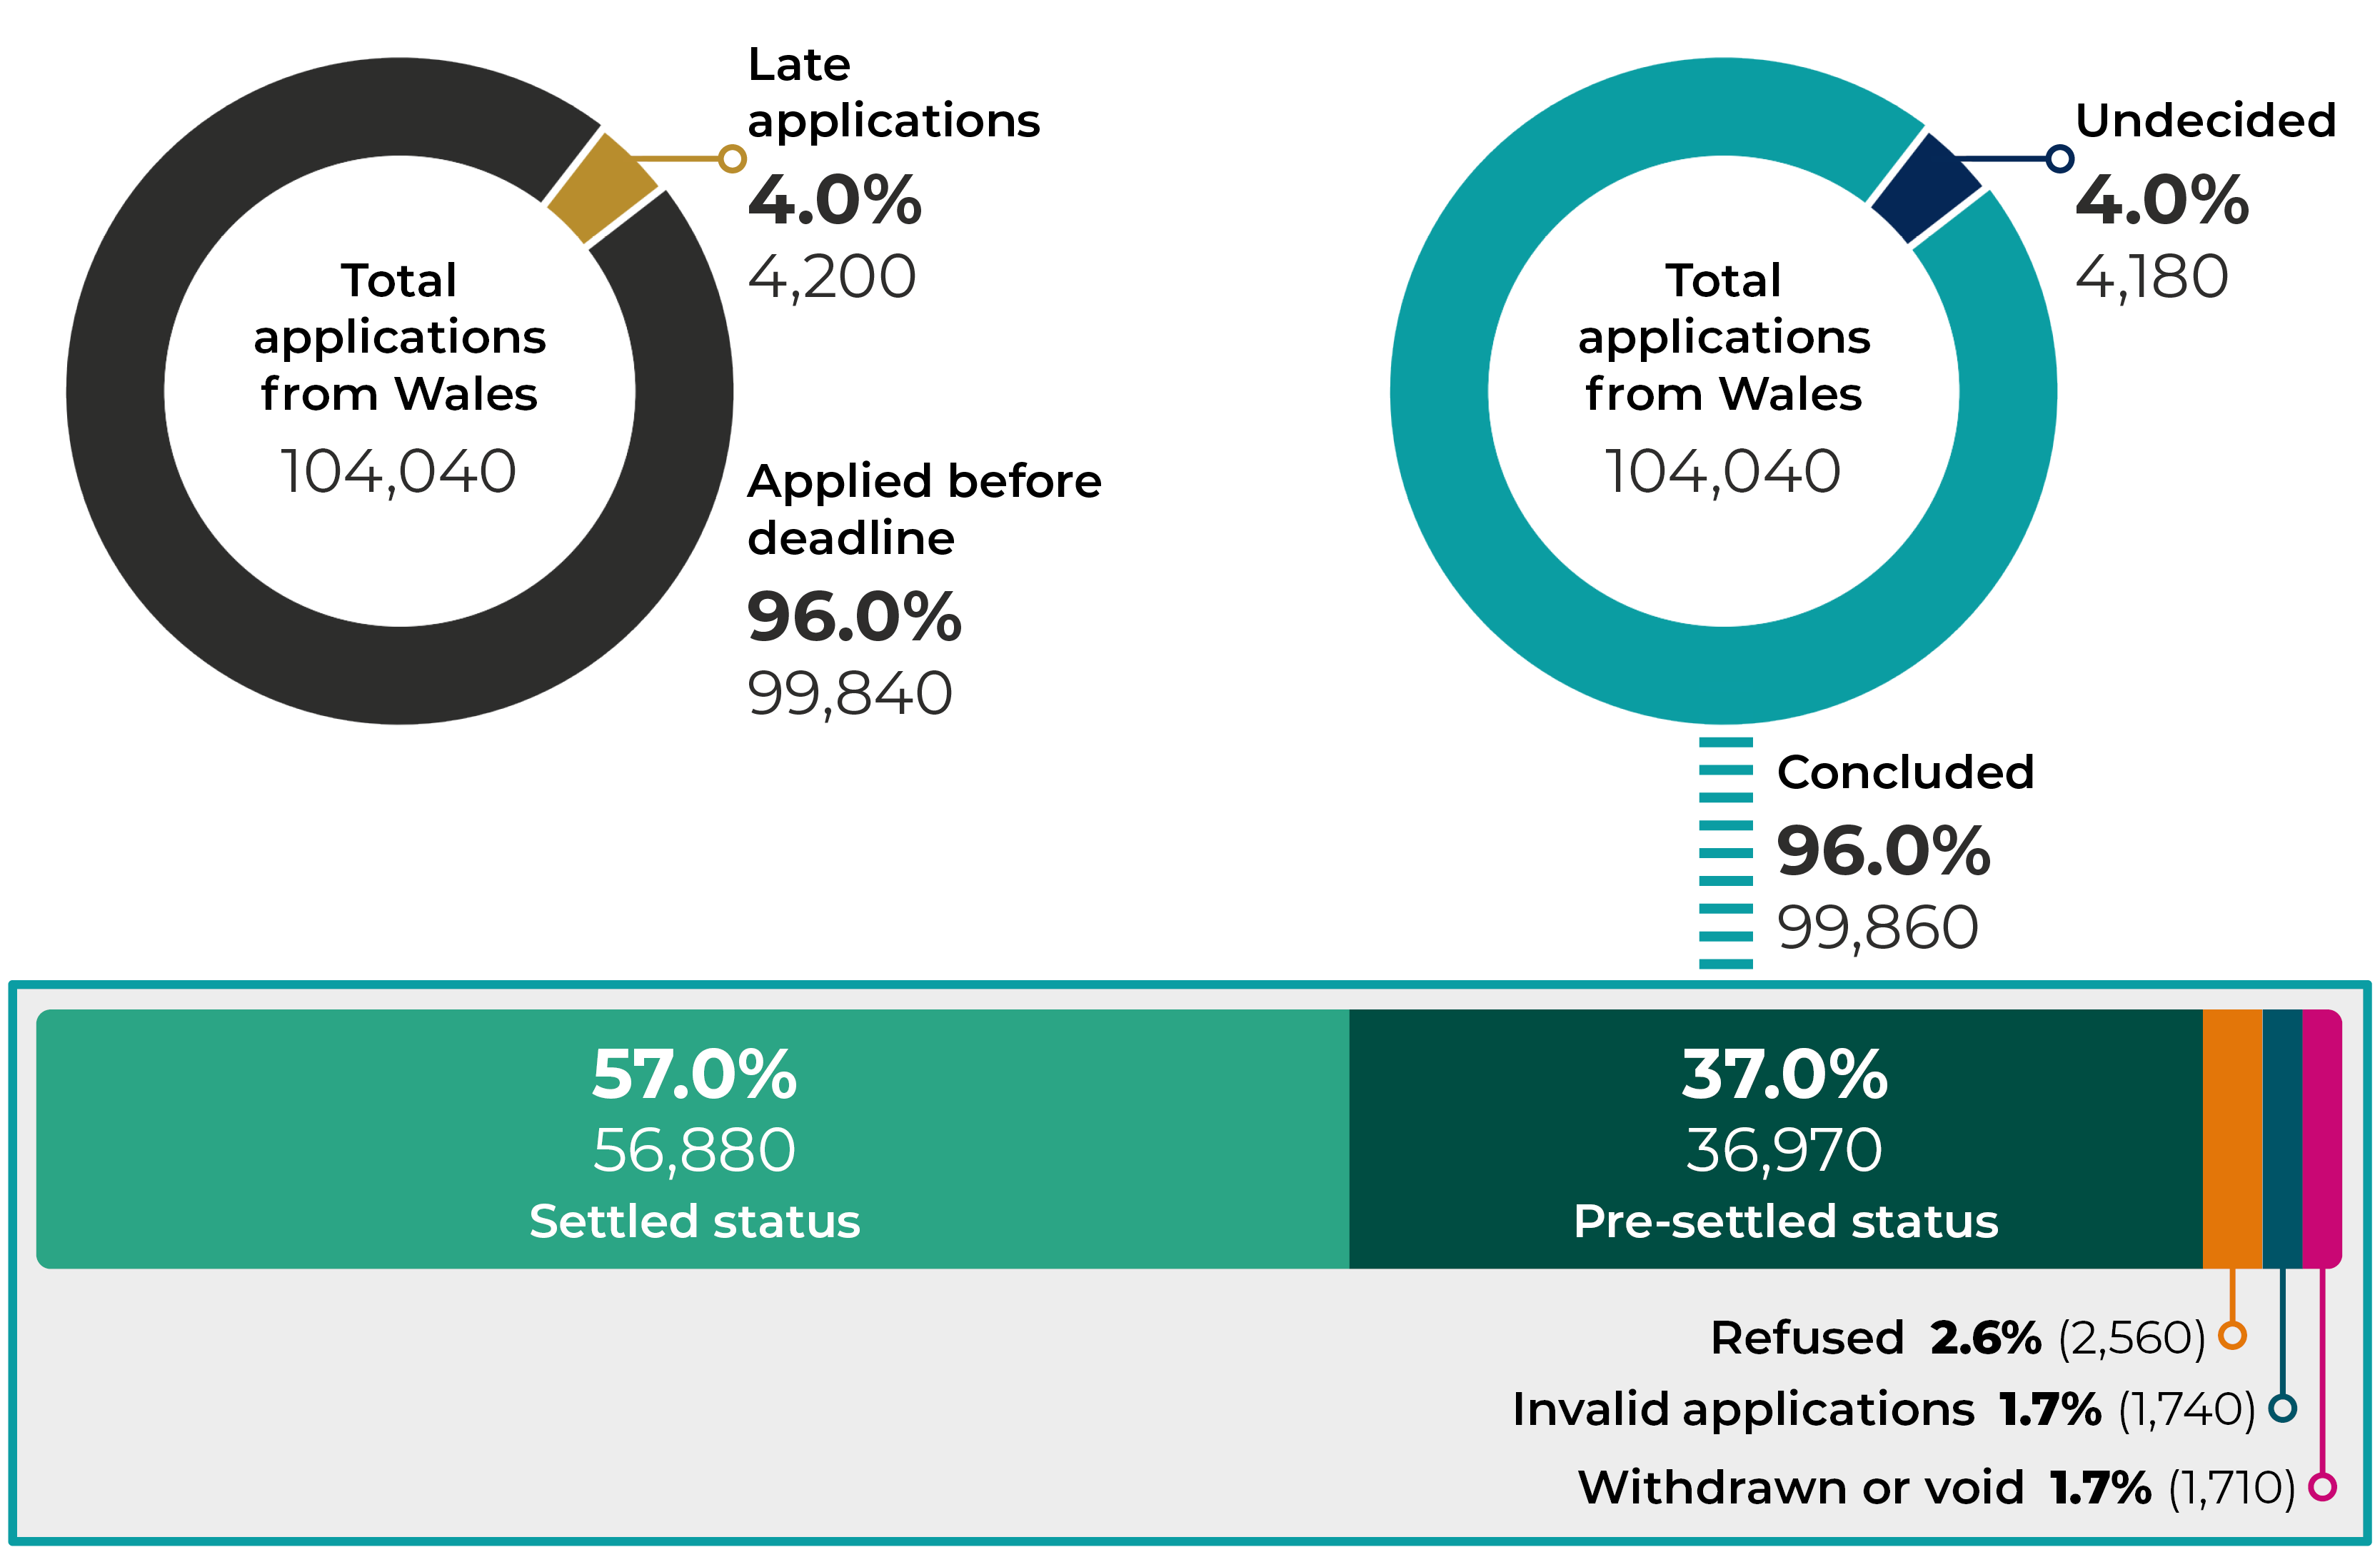 Infographic showing outcomes of 104040 applications received from Wales up to 31 December 2021. 96% (99840) applied before the deadline and 4% (4,200) were late applications. 96% (99860) of applications are decided and 4% (4,180) are undecided. Of the decided applications, 57% (56880) were granted settled status, 37% (36970) were granted pre-settled status, 2.6% (2560) were refused, 1.7% (1740) were invalid and 1.7% (1710) were withdrawn or void.